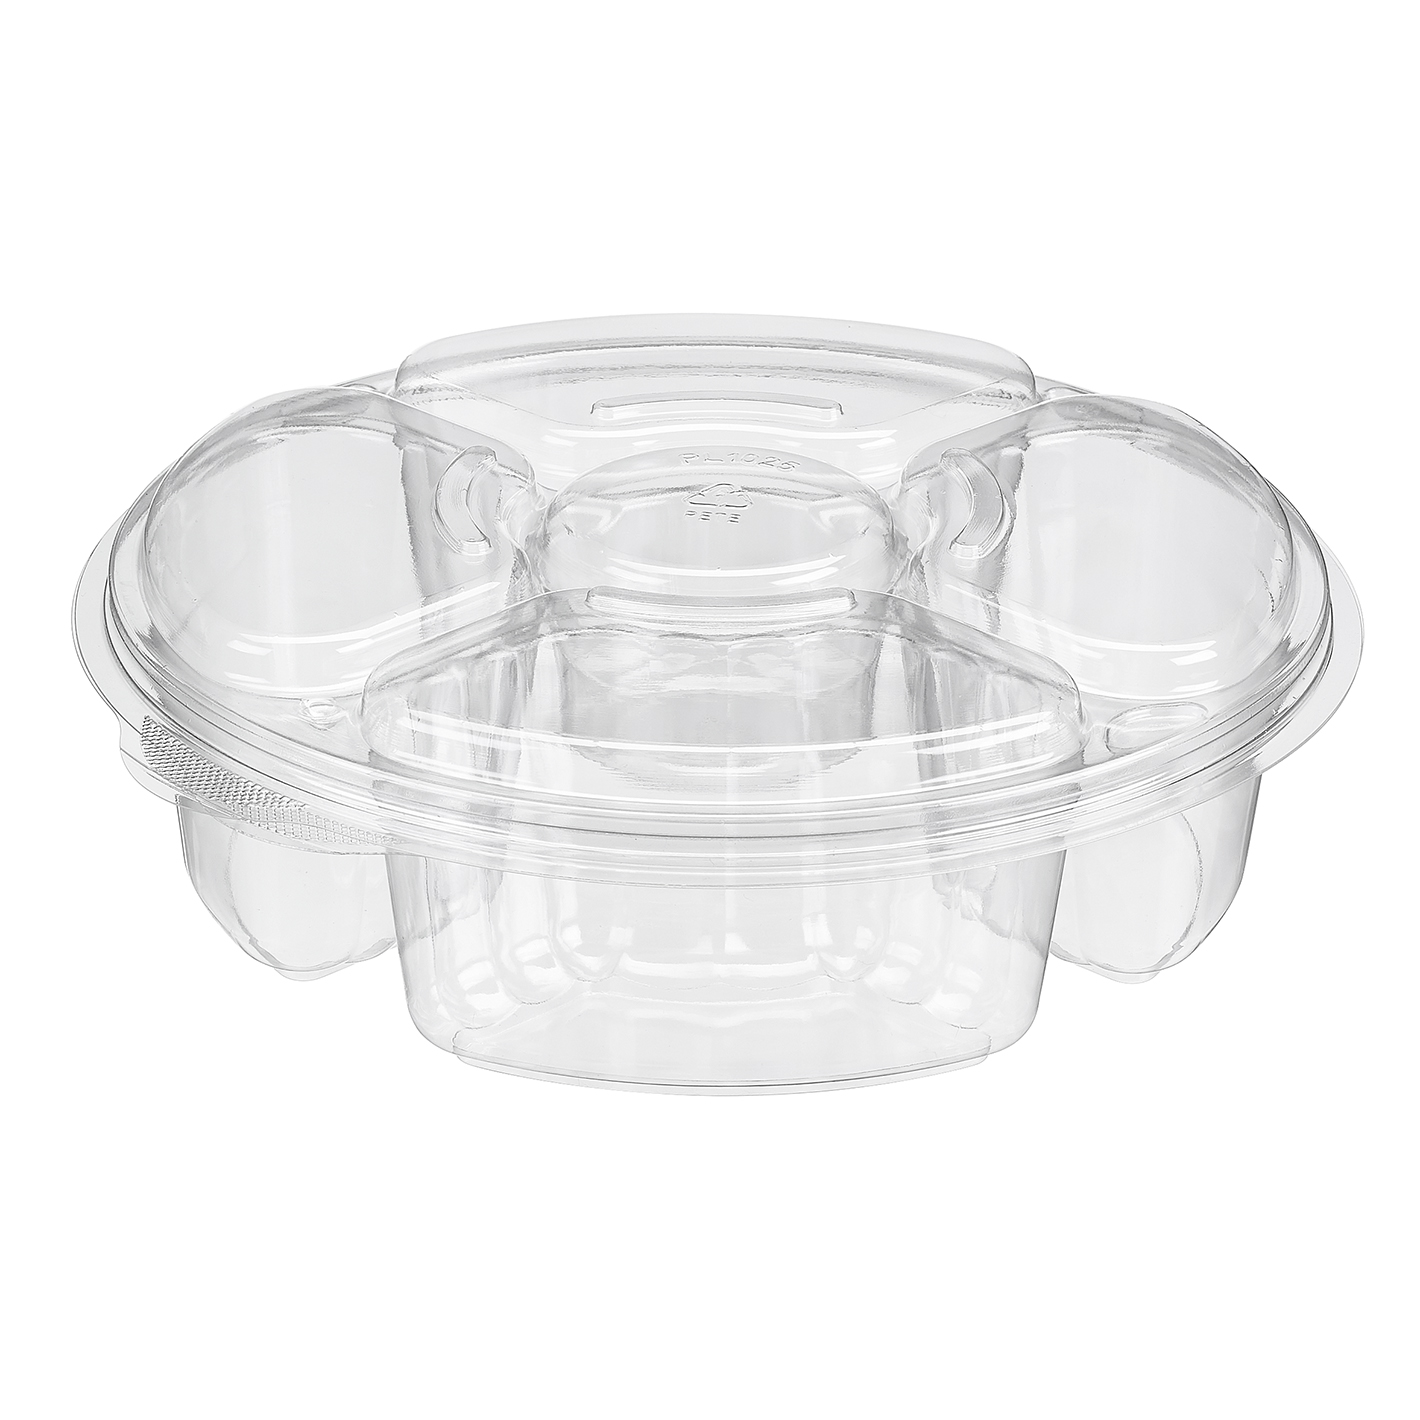 10.25 PRODUCE TRAY W/CUP 4 COMPARTMENT 100/CASE PL065C